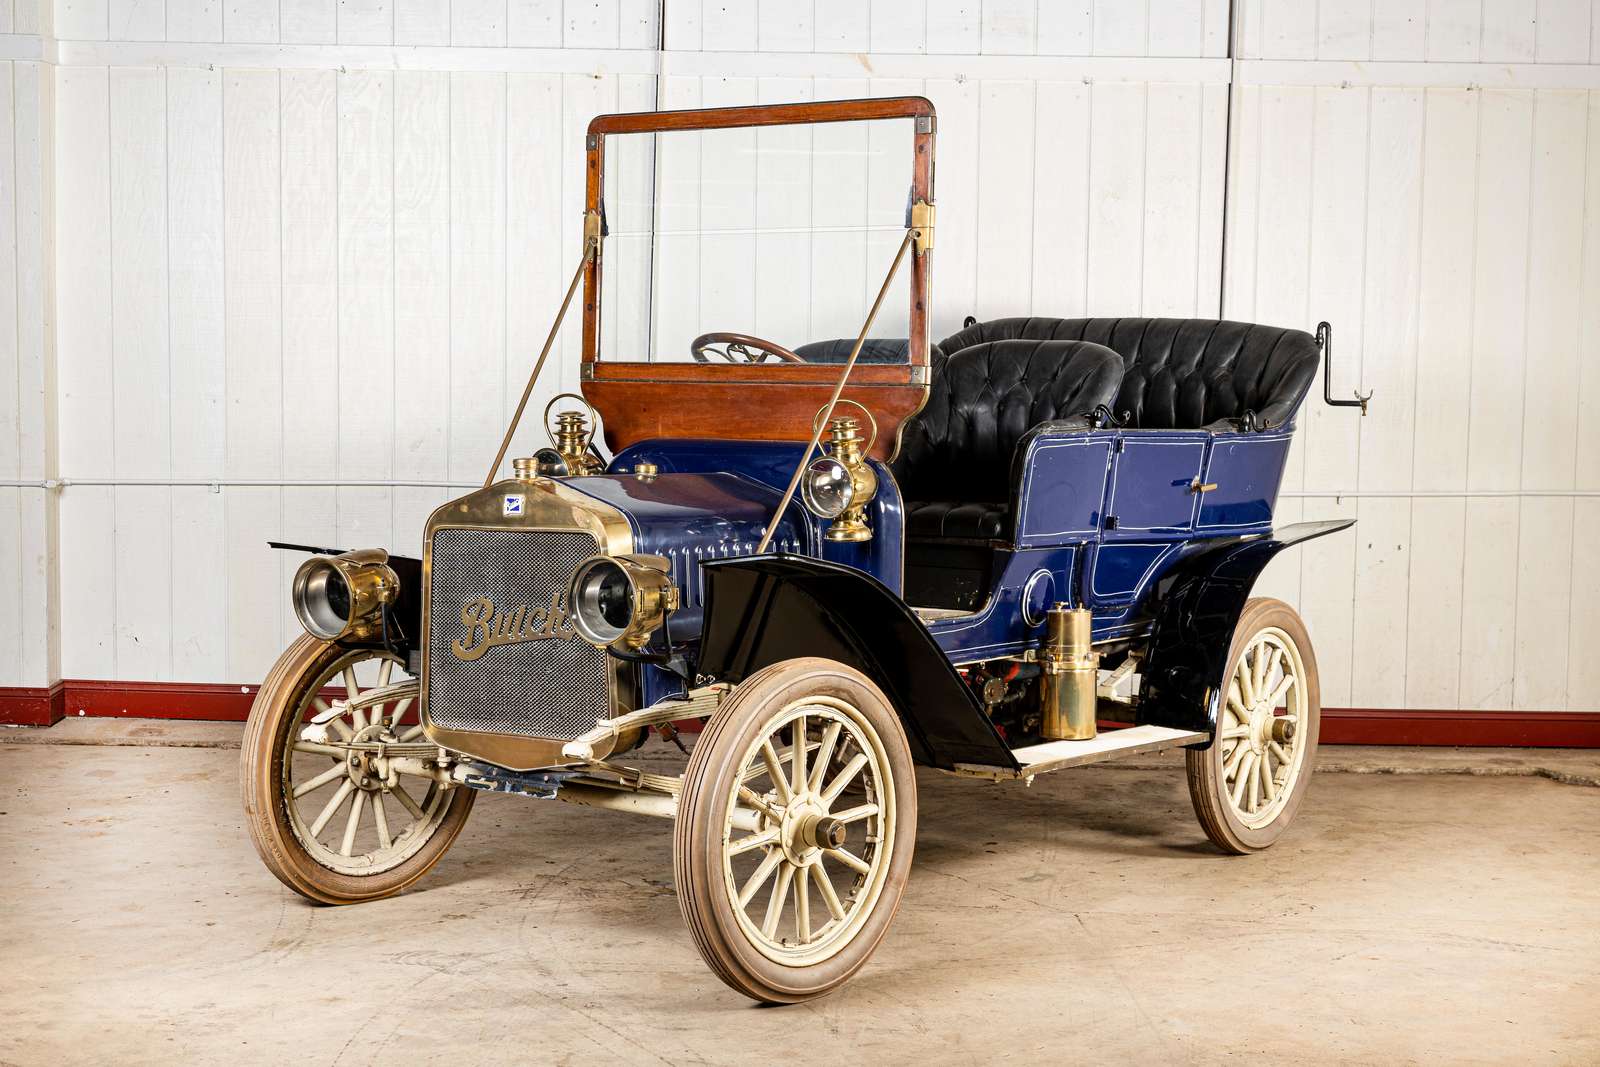 Buick 1907/8 puzzle online from photo